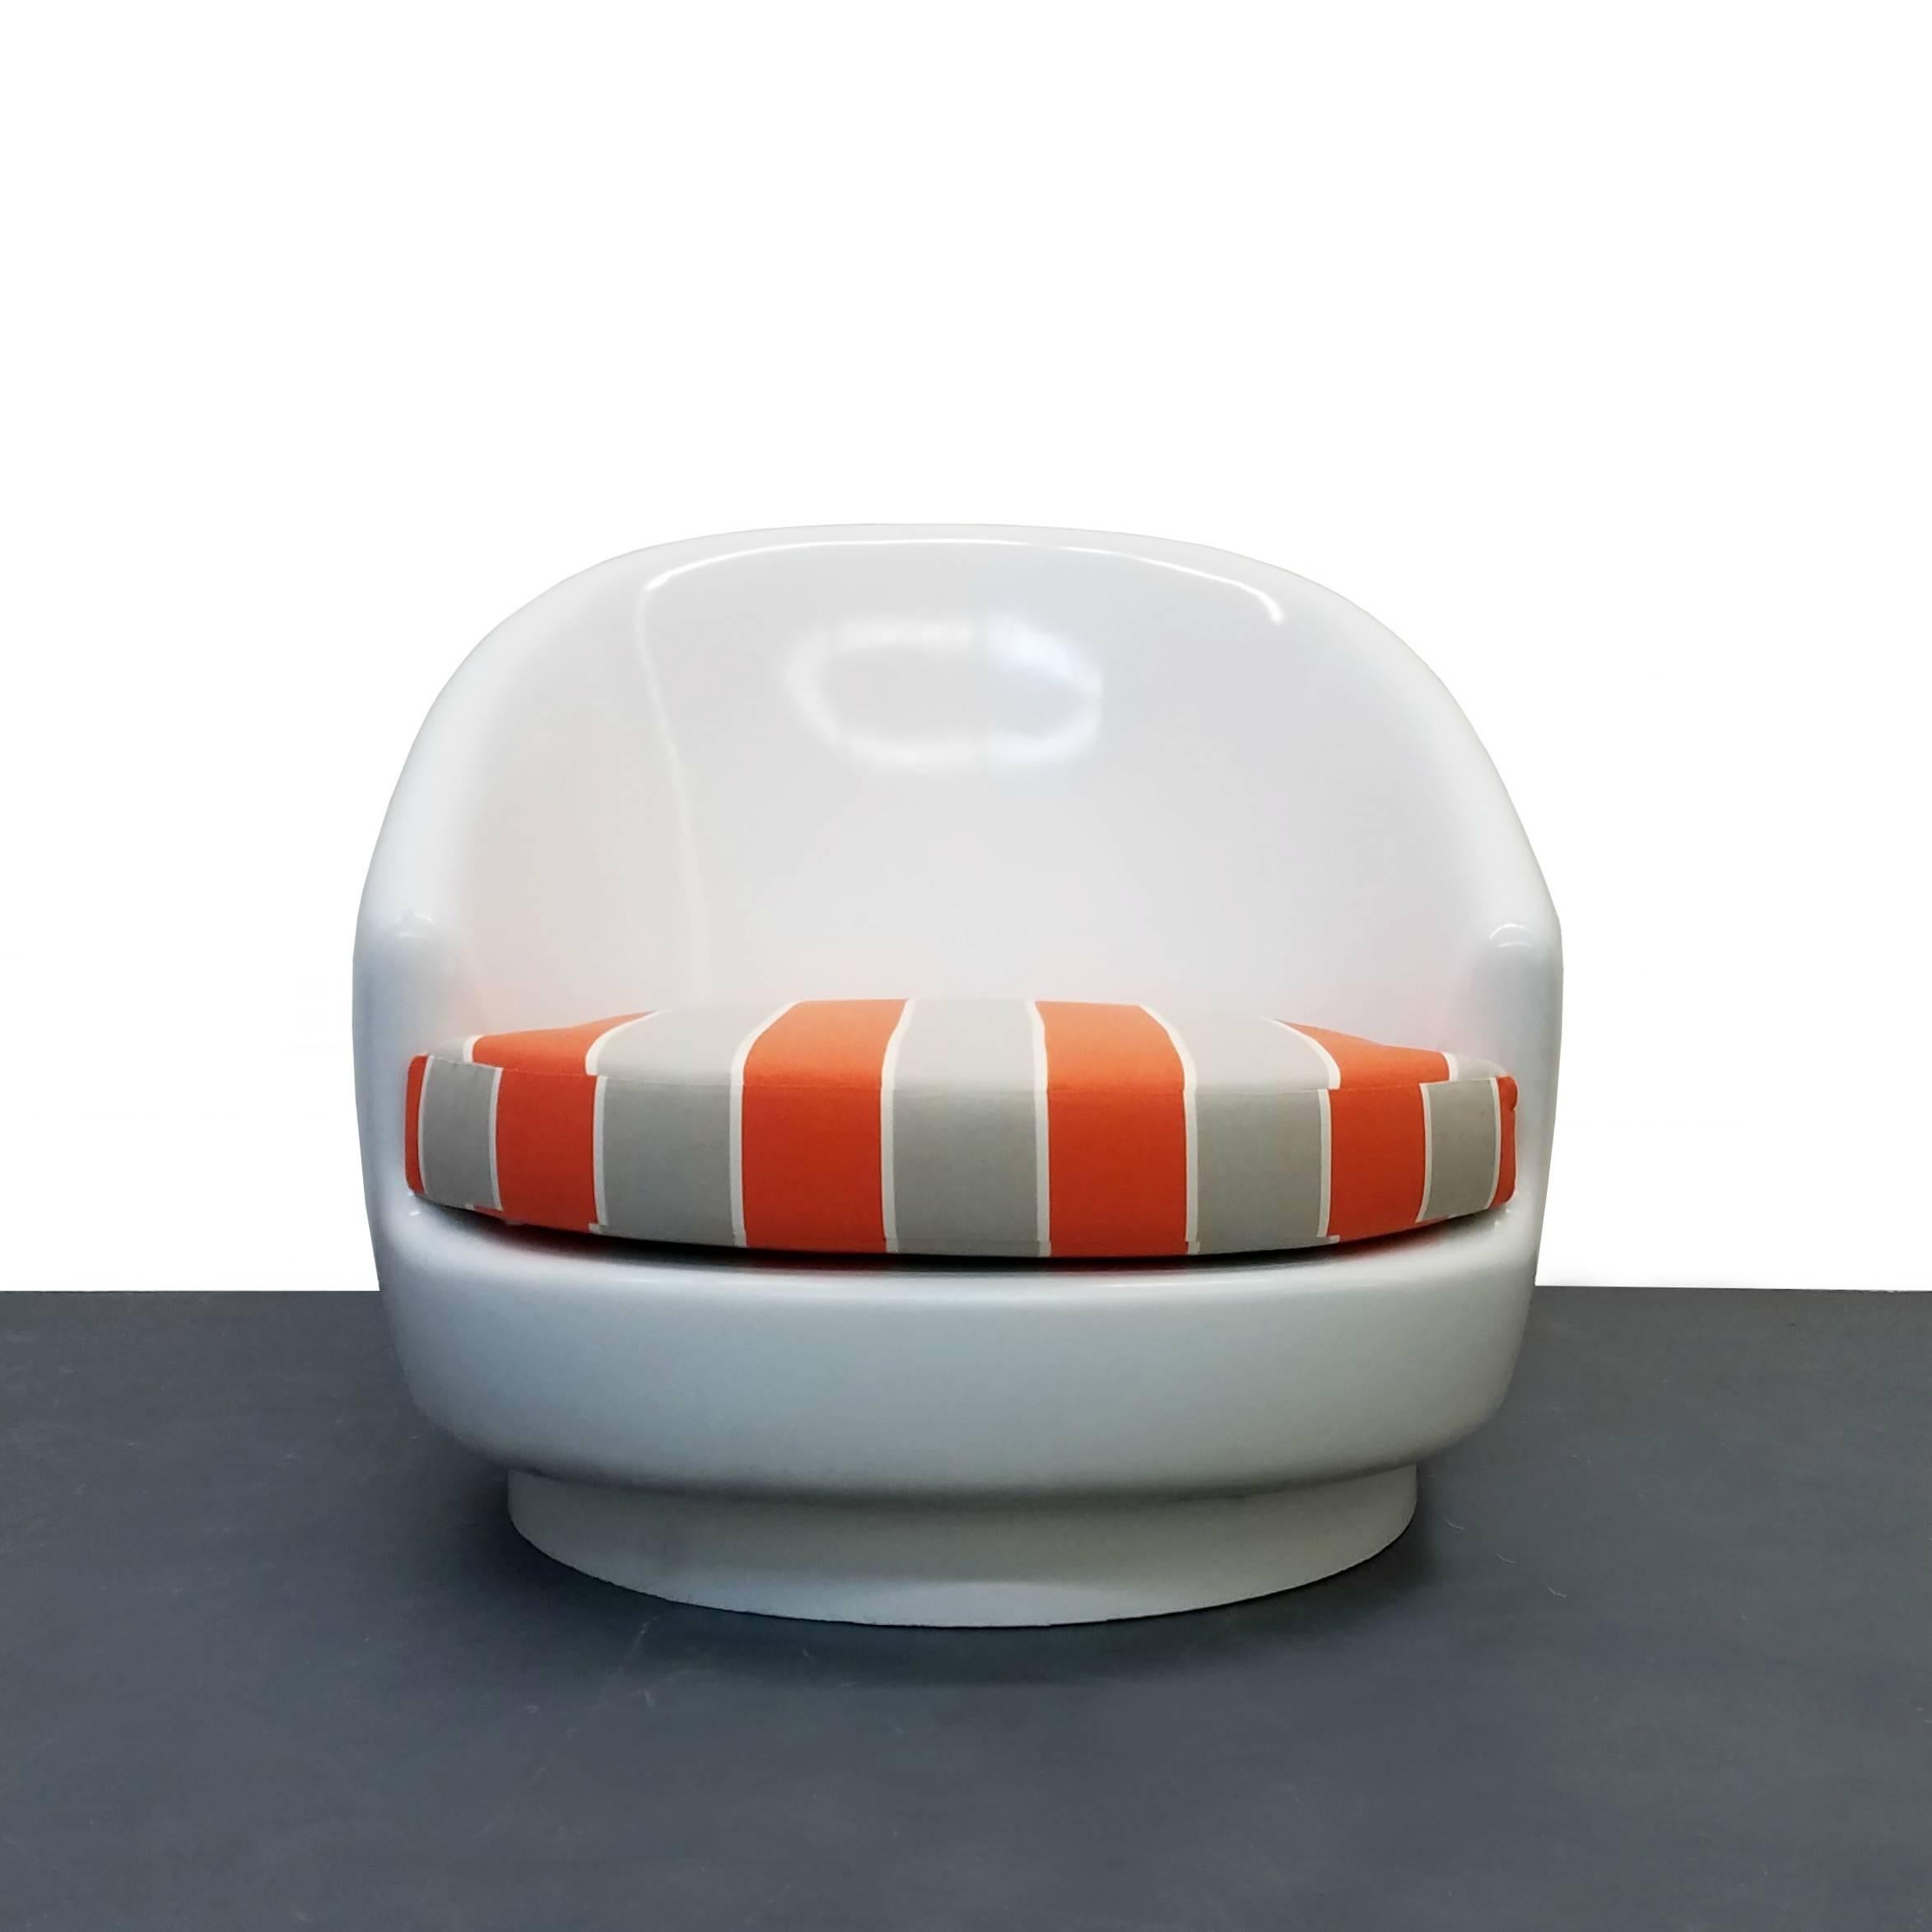 Oversized and by oversized I mean Huge, fiberglass egg shape indoor outdoor chair. Cushion is all new with fade resistant outdoor fabric in a fun orange and gray stripe. Can be used indoor as a fun conversation piece or outdoor on a patio or pool